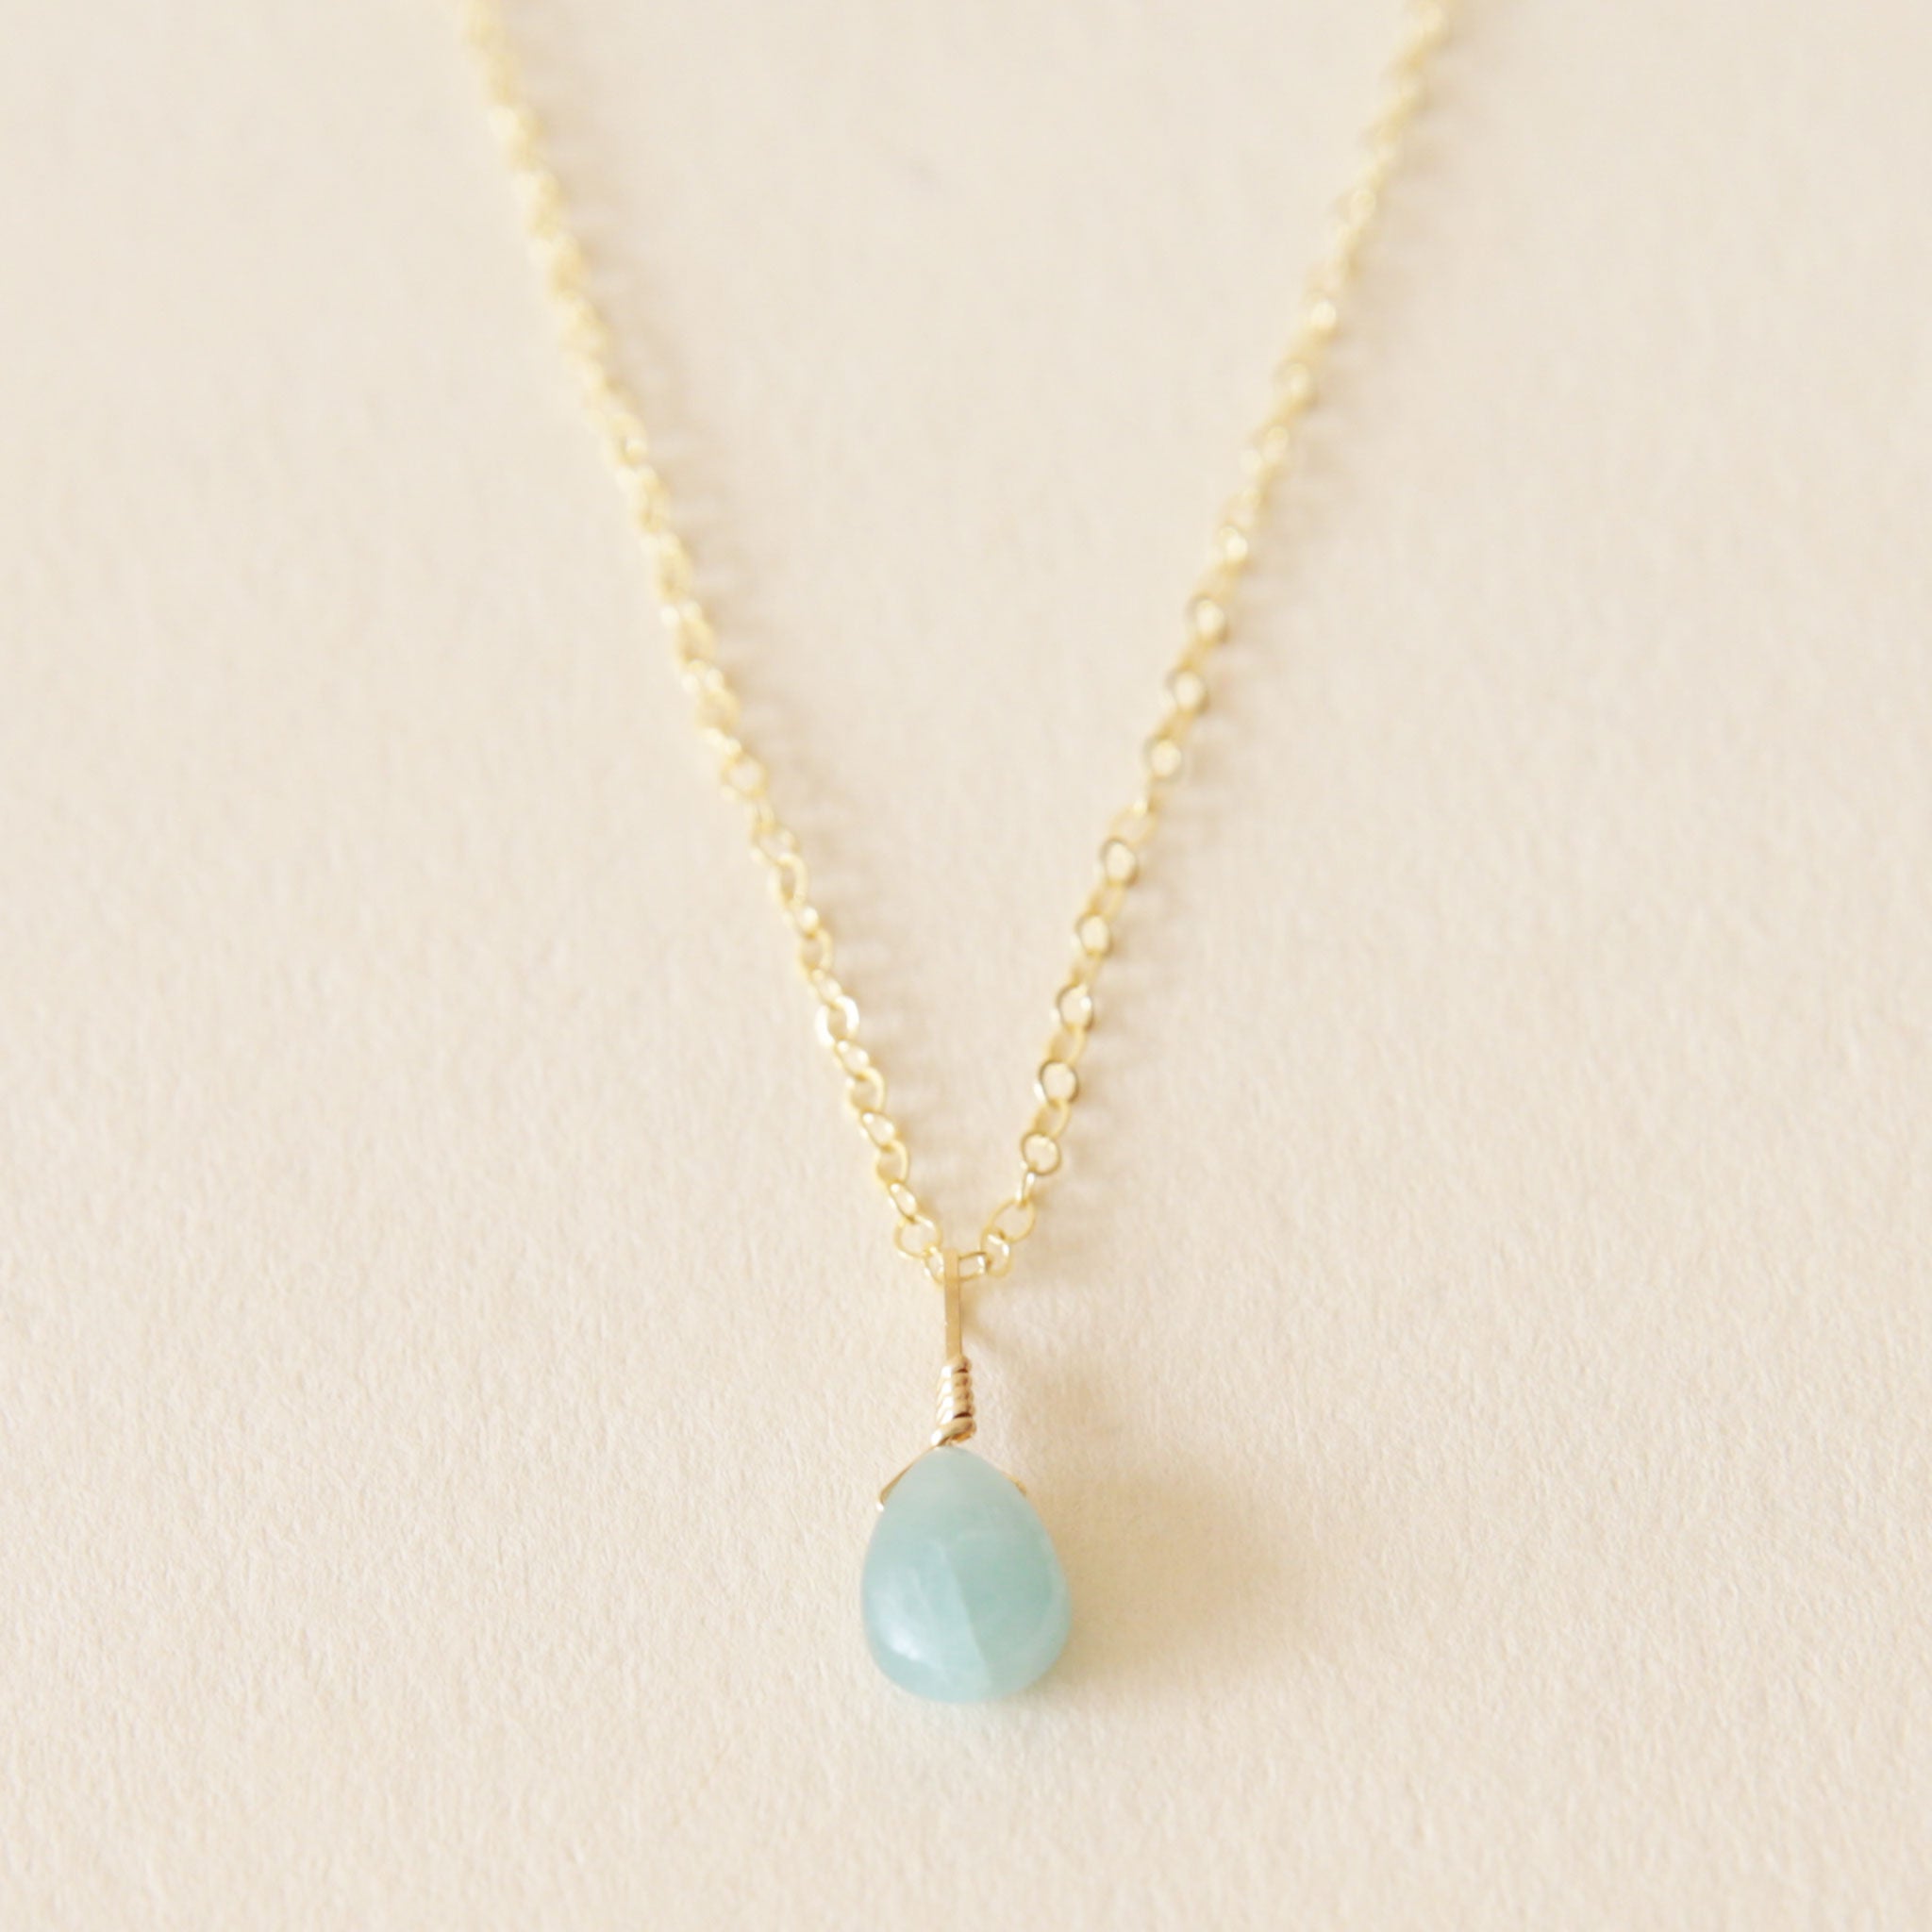 On a neutral background is a gold chain necklace with a blue Aquamarine stone at the center.